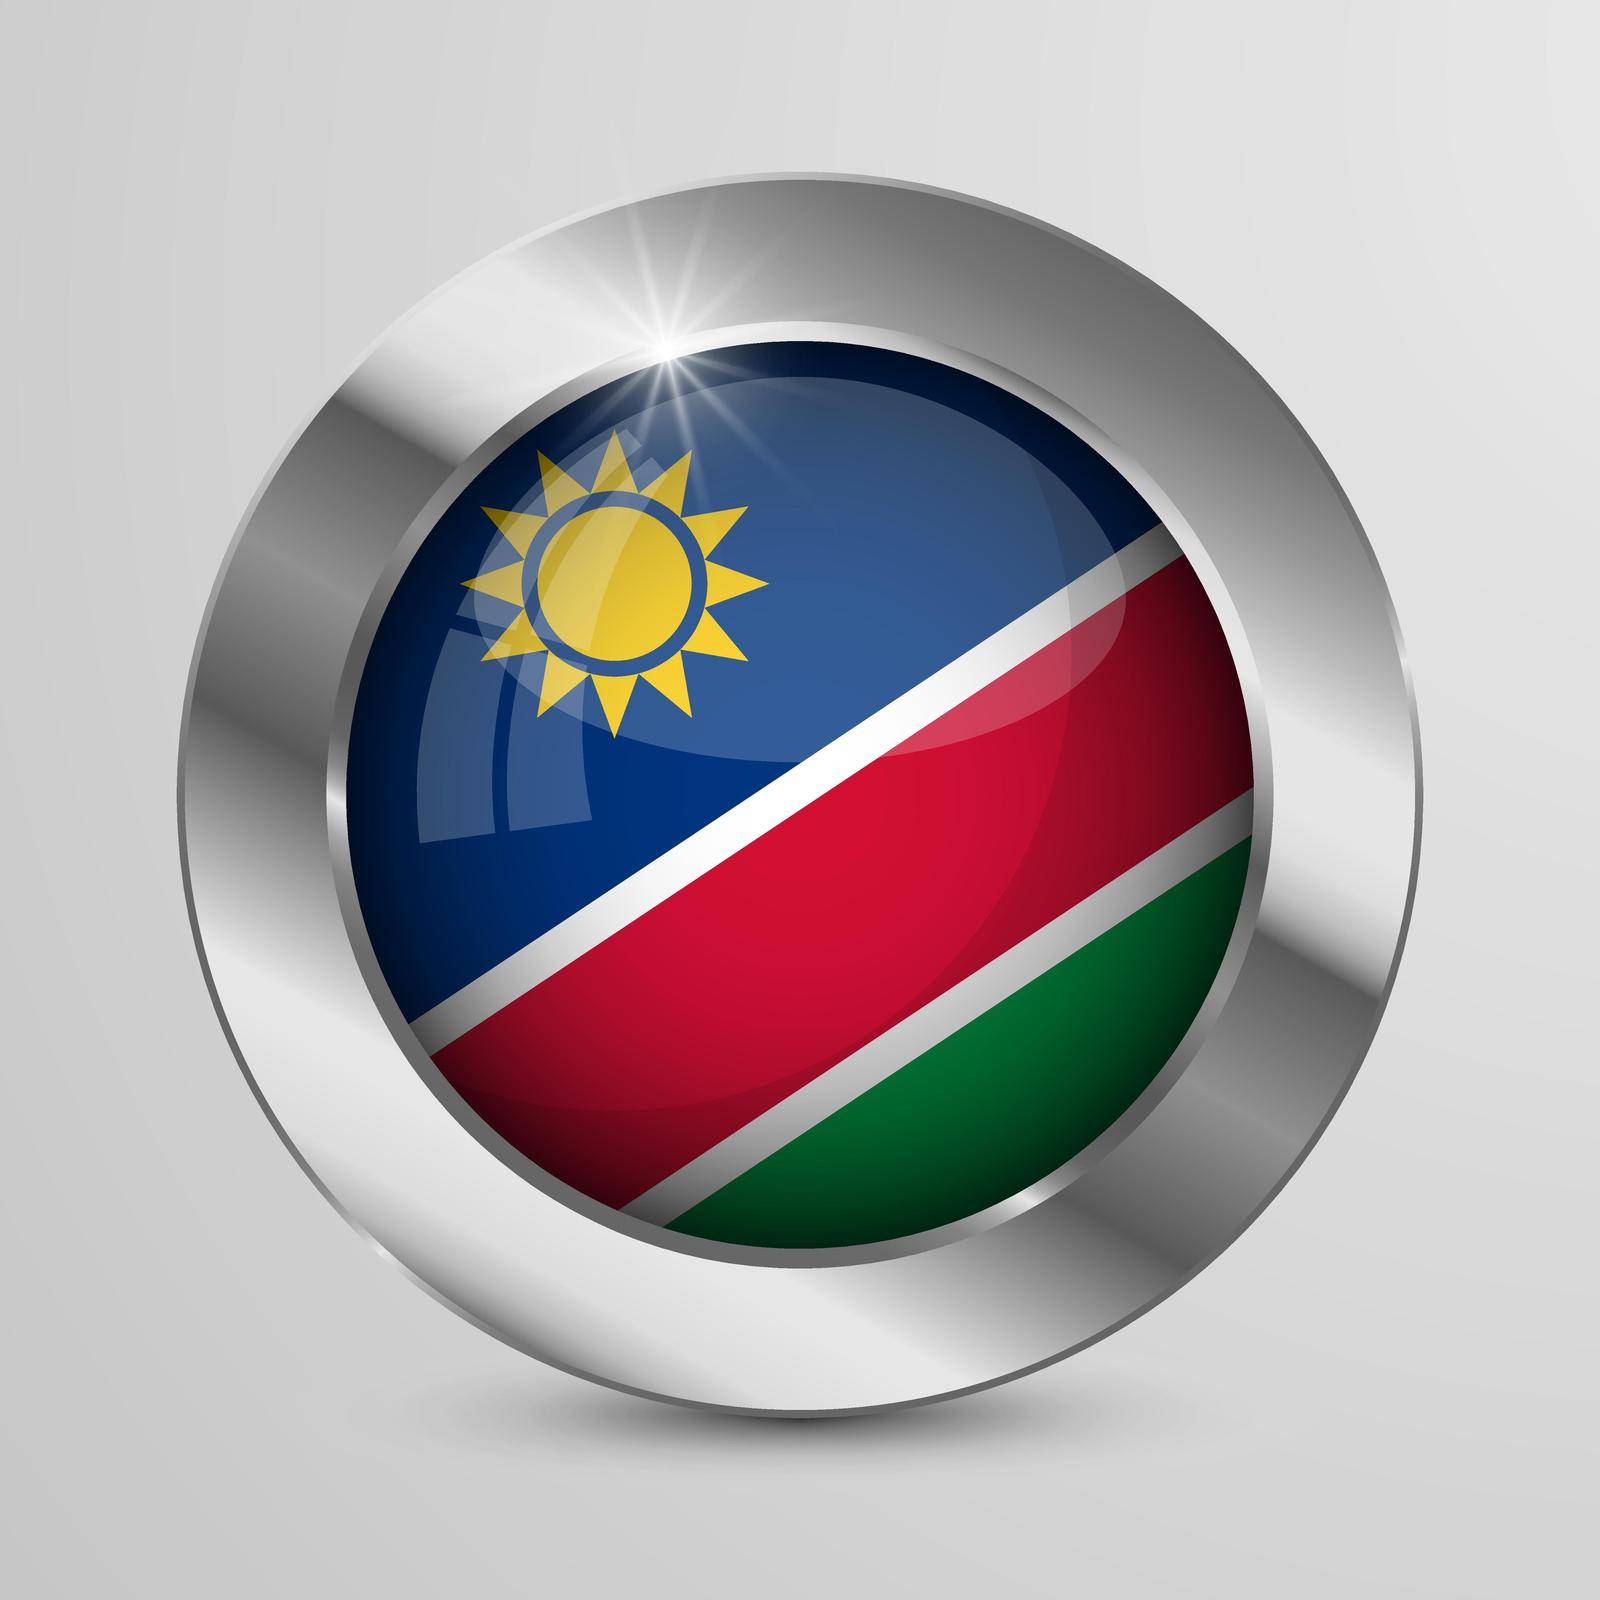 EPS10 Vector Patriotic Button with Namibia flag colors. An element of impact for the use you want to make of it.